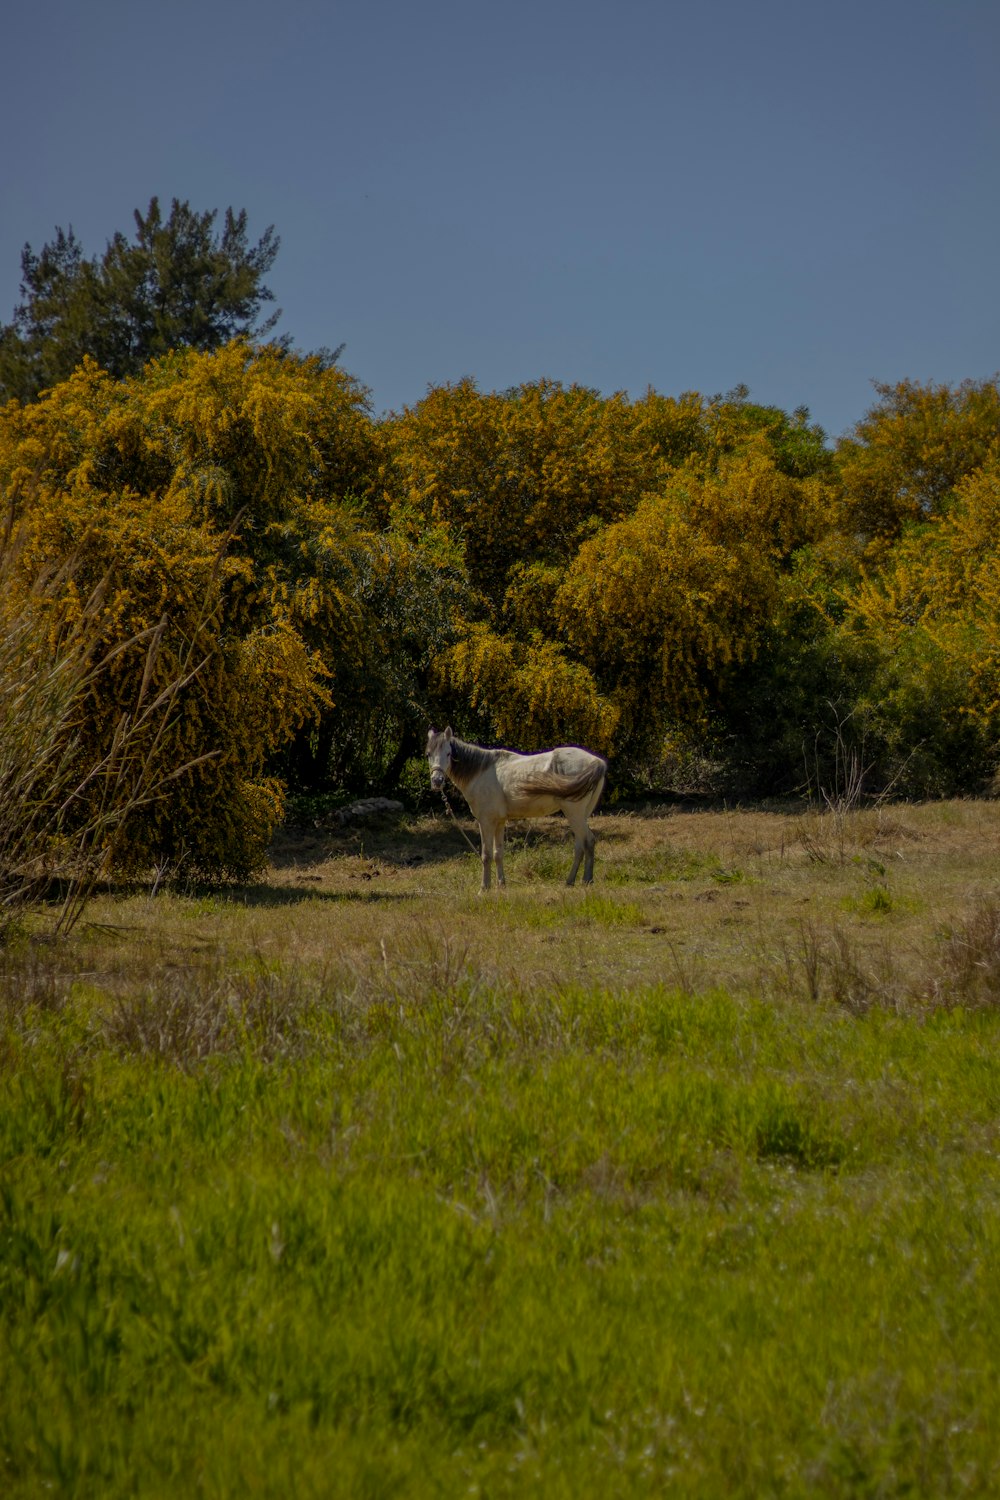 a cow standing in a field with trees in the background